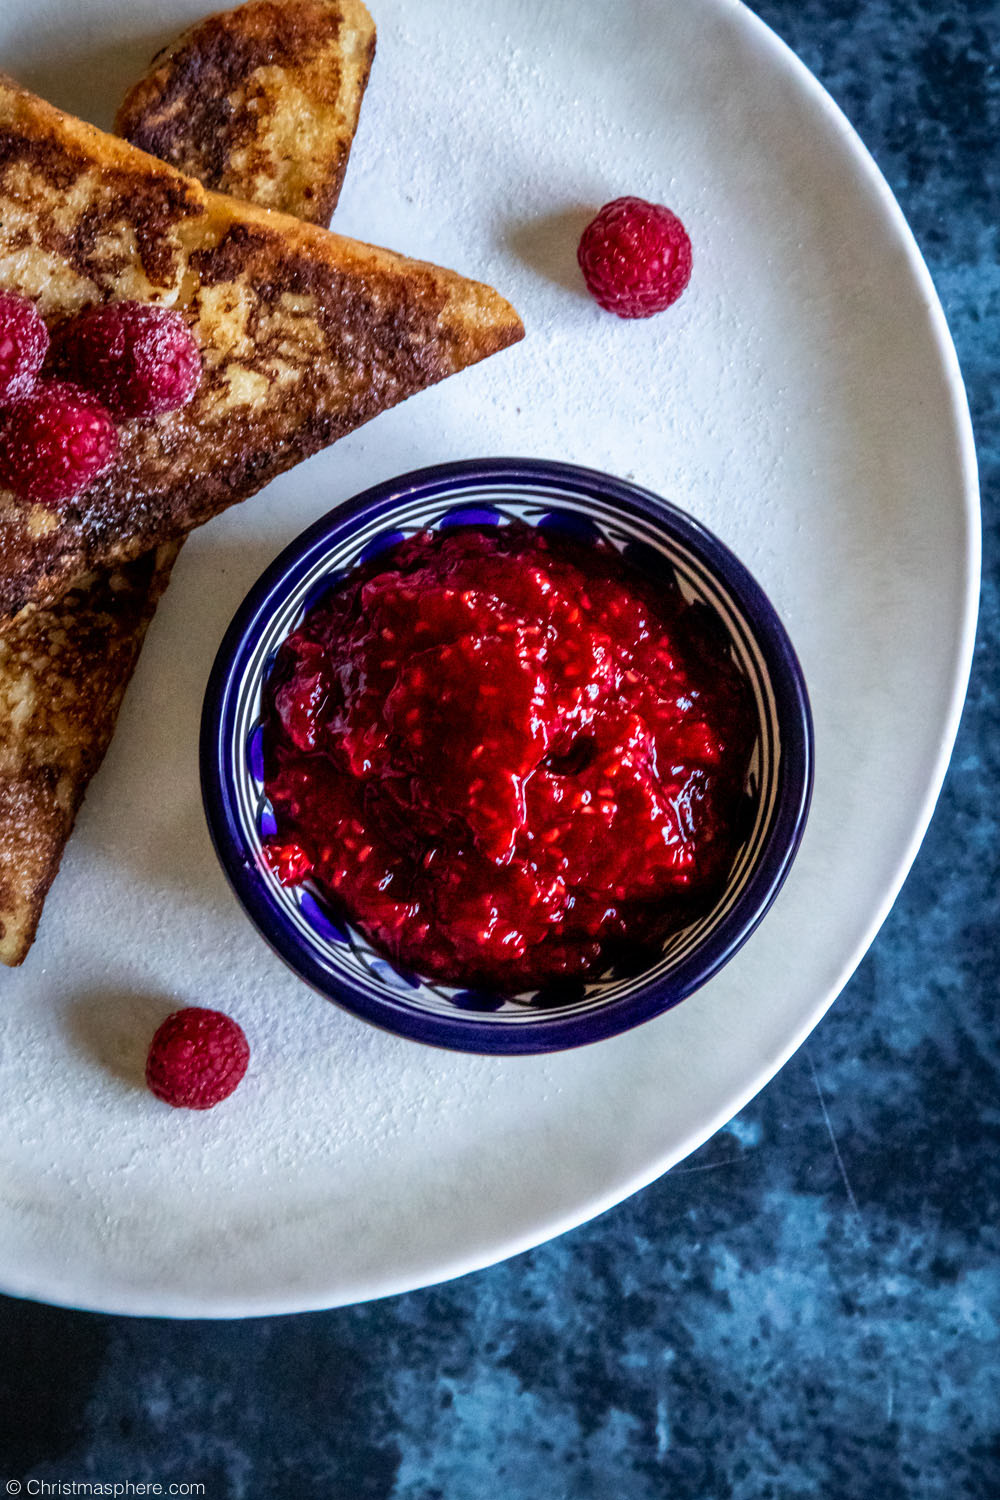 How to Make French Toast with Compote